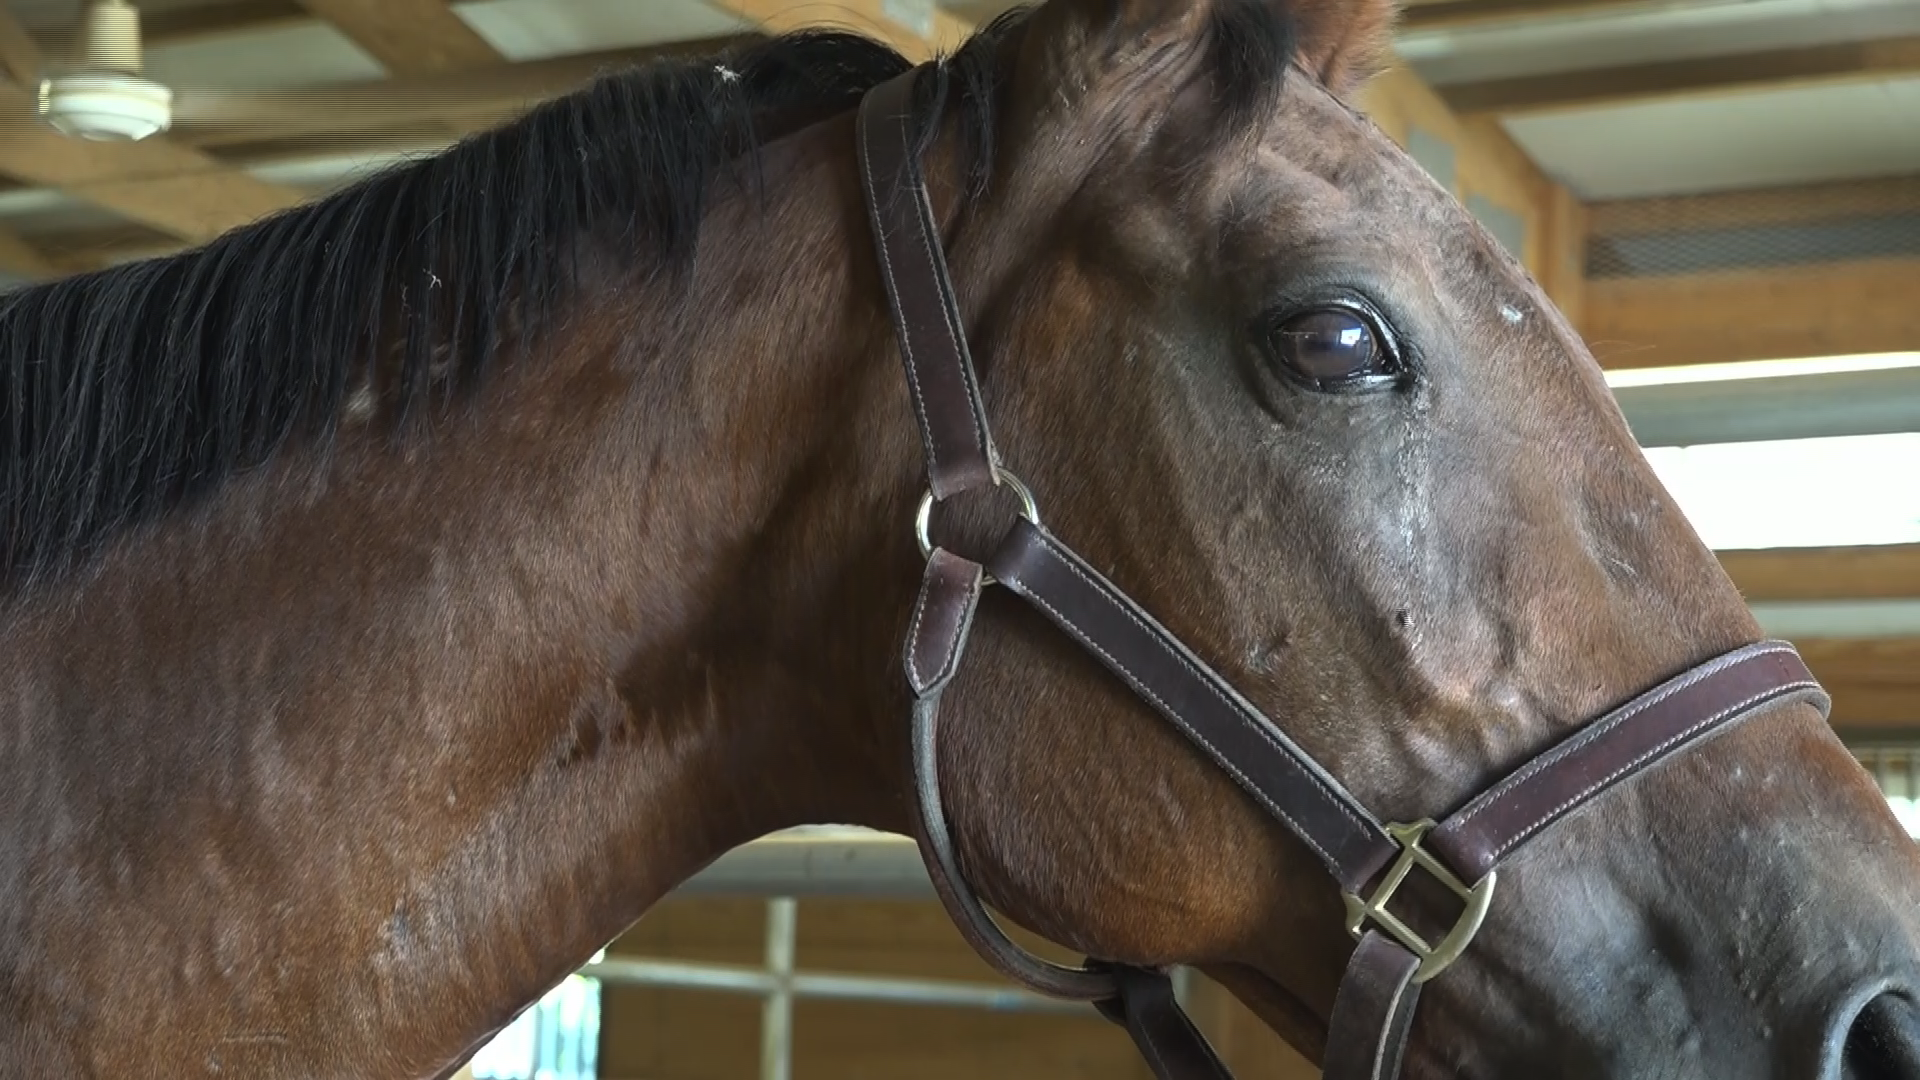 Long Meadow Rescue Ranch saved "Journey the horse" from the crash on I-44, soon after they found out she was pregnant.